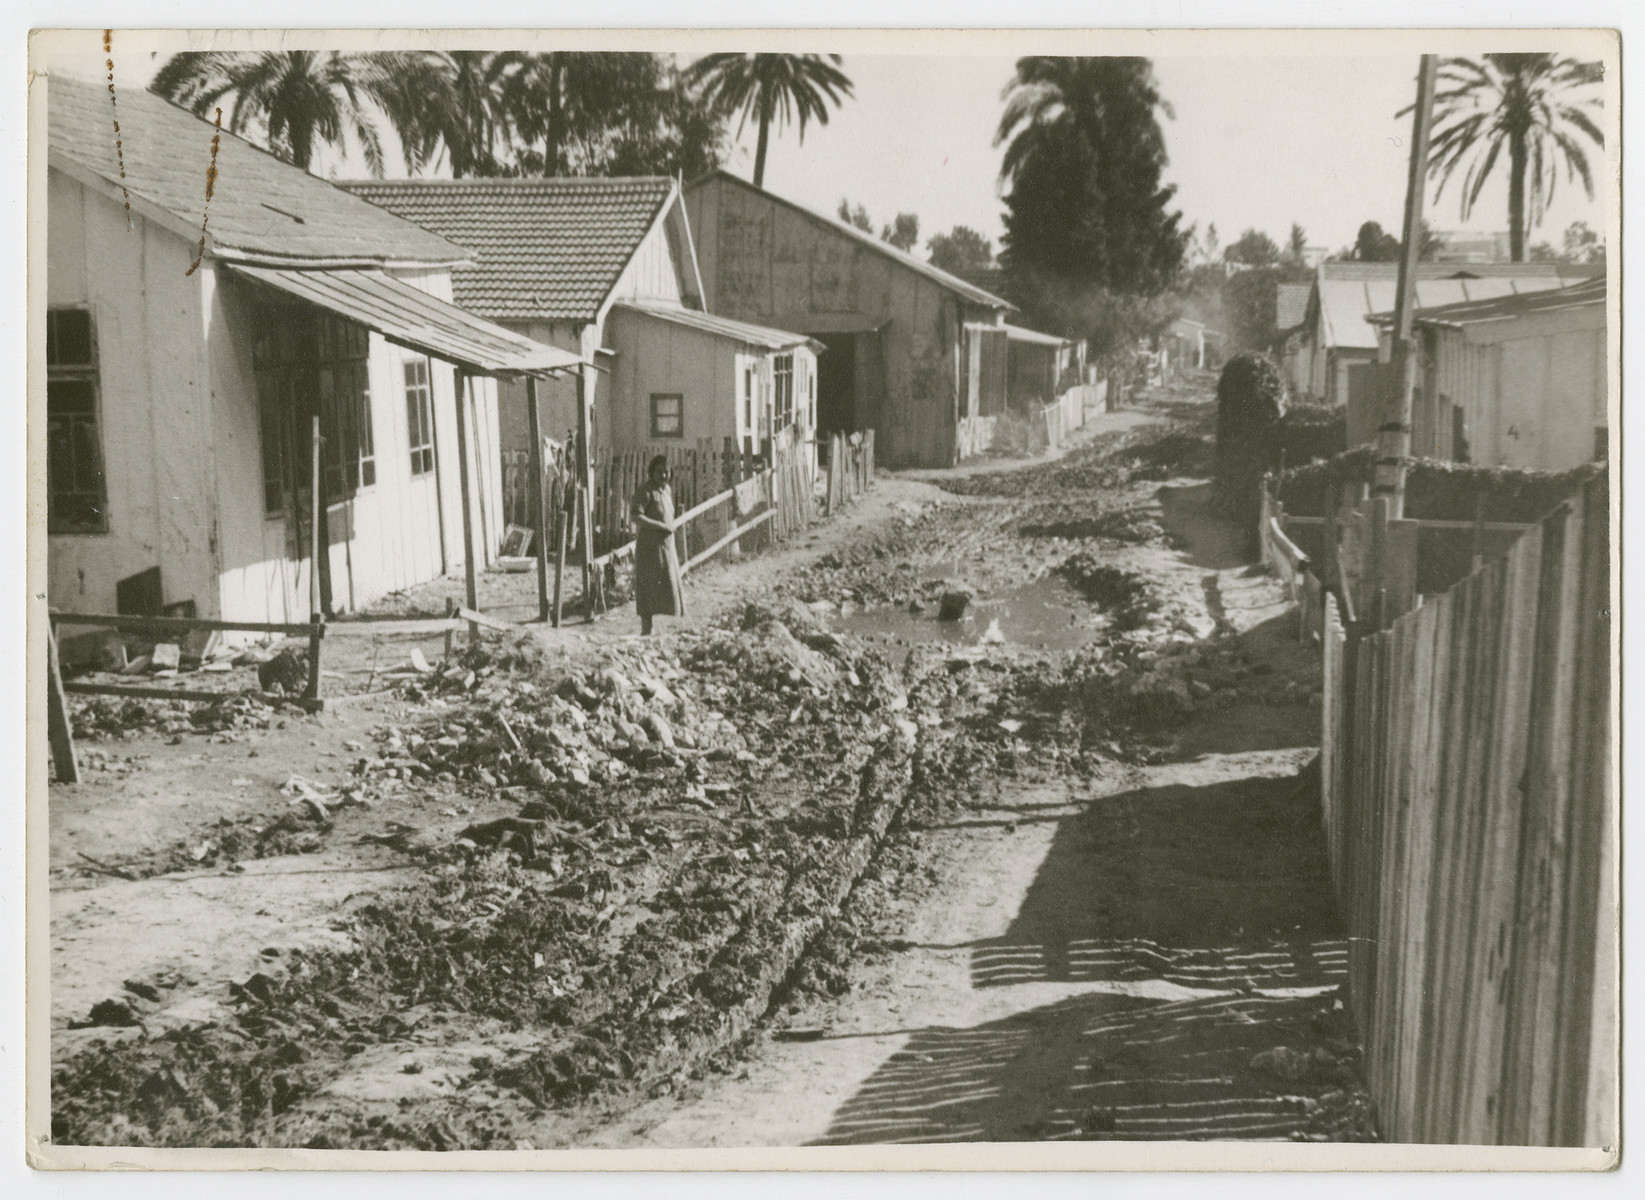 View of a settlement in Palestine.

Photograph is used on page 173 of Robert Gessner's "Some of My Best Friends are Jews."